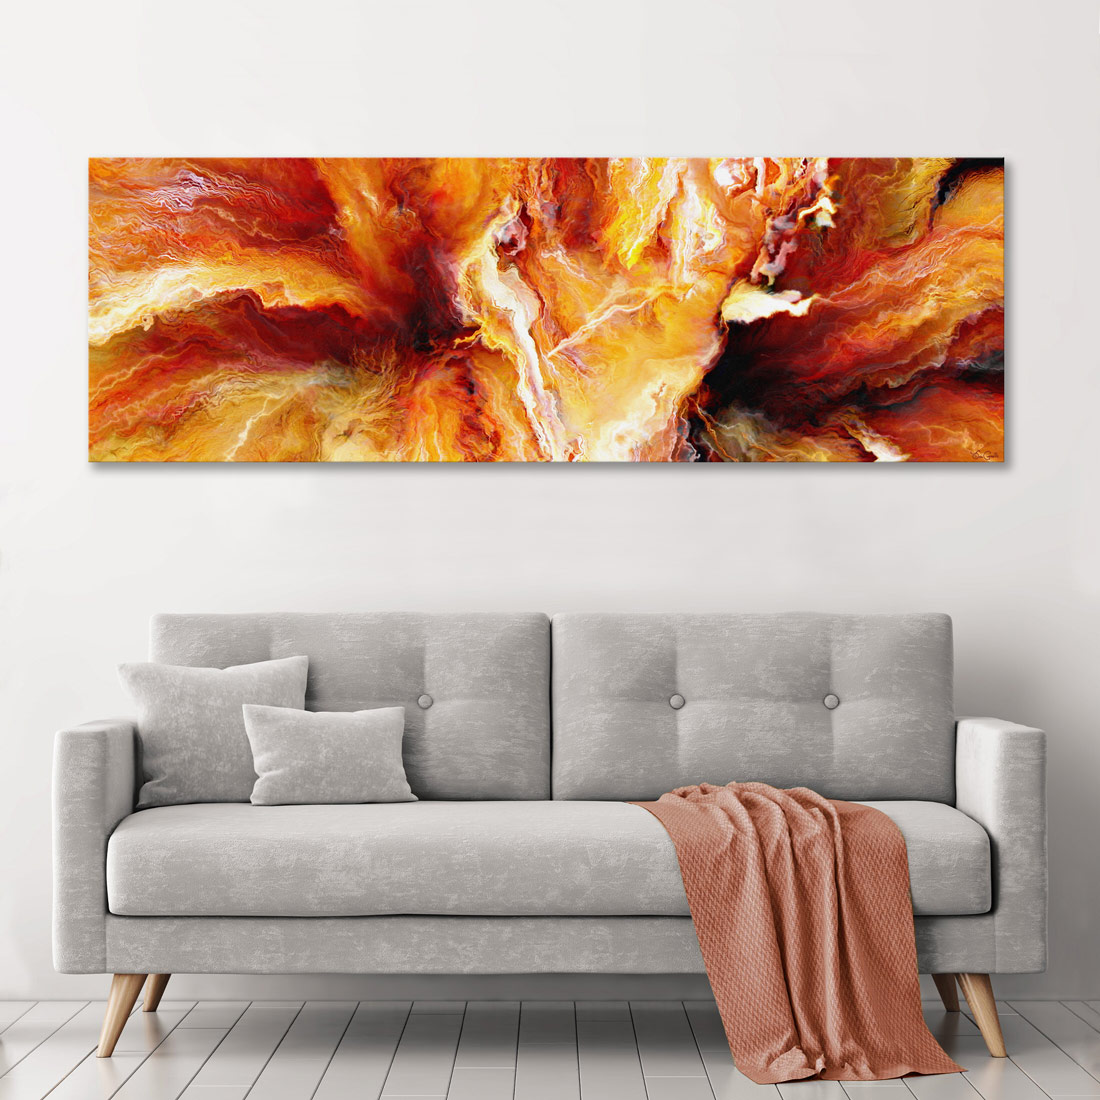 Passion Abstract Art. A large canvas wall art abstract painting for sale by Jaison Cianelli.